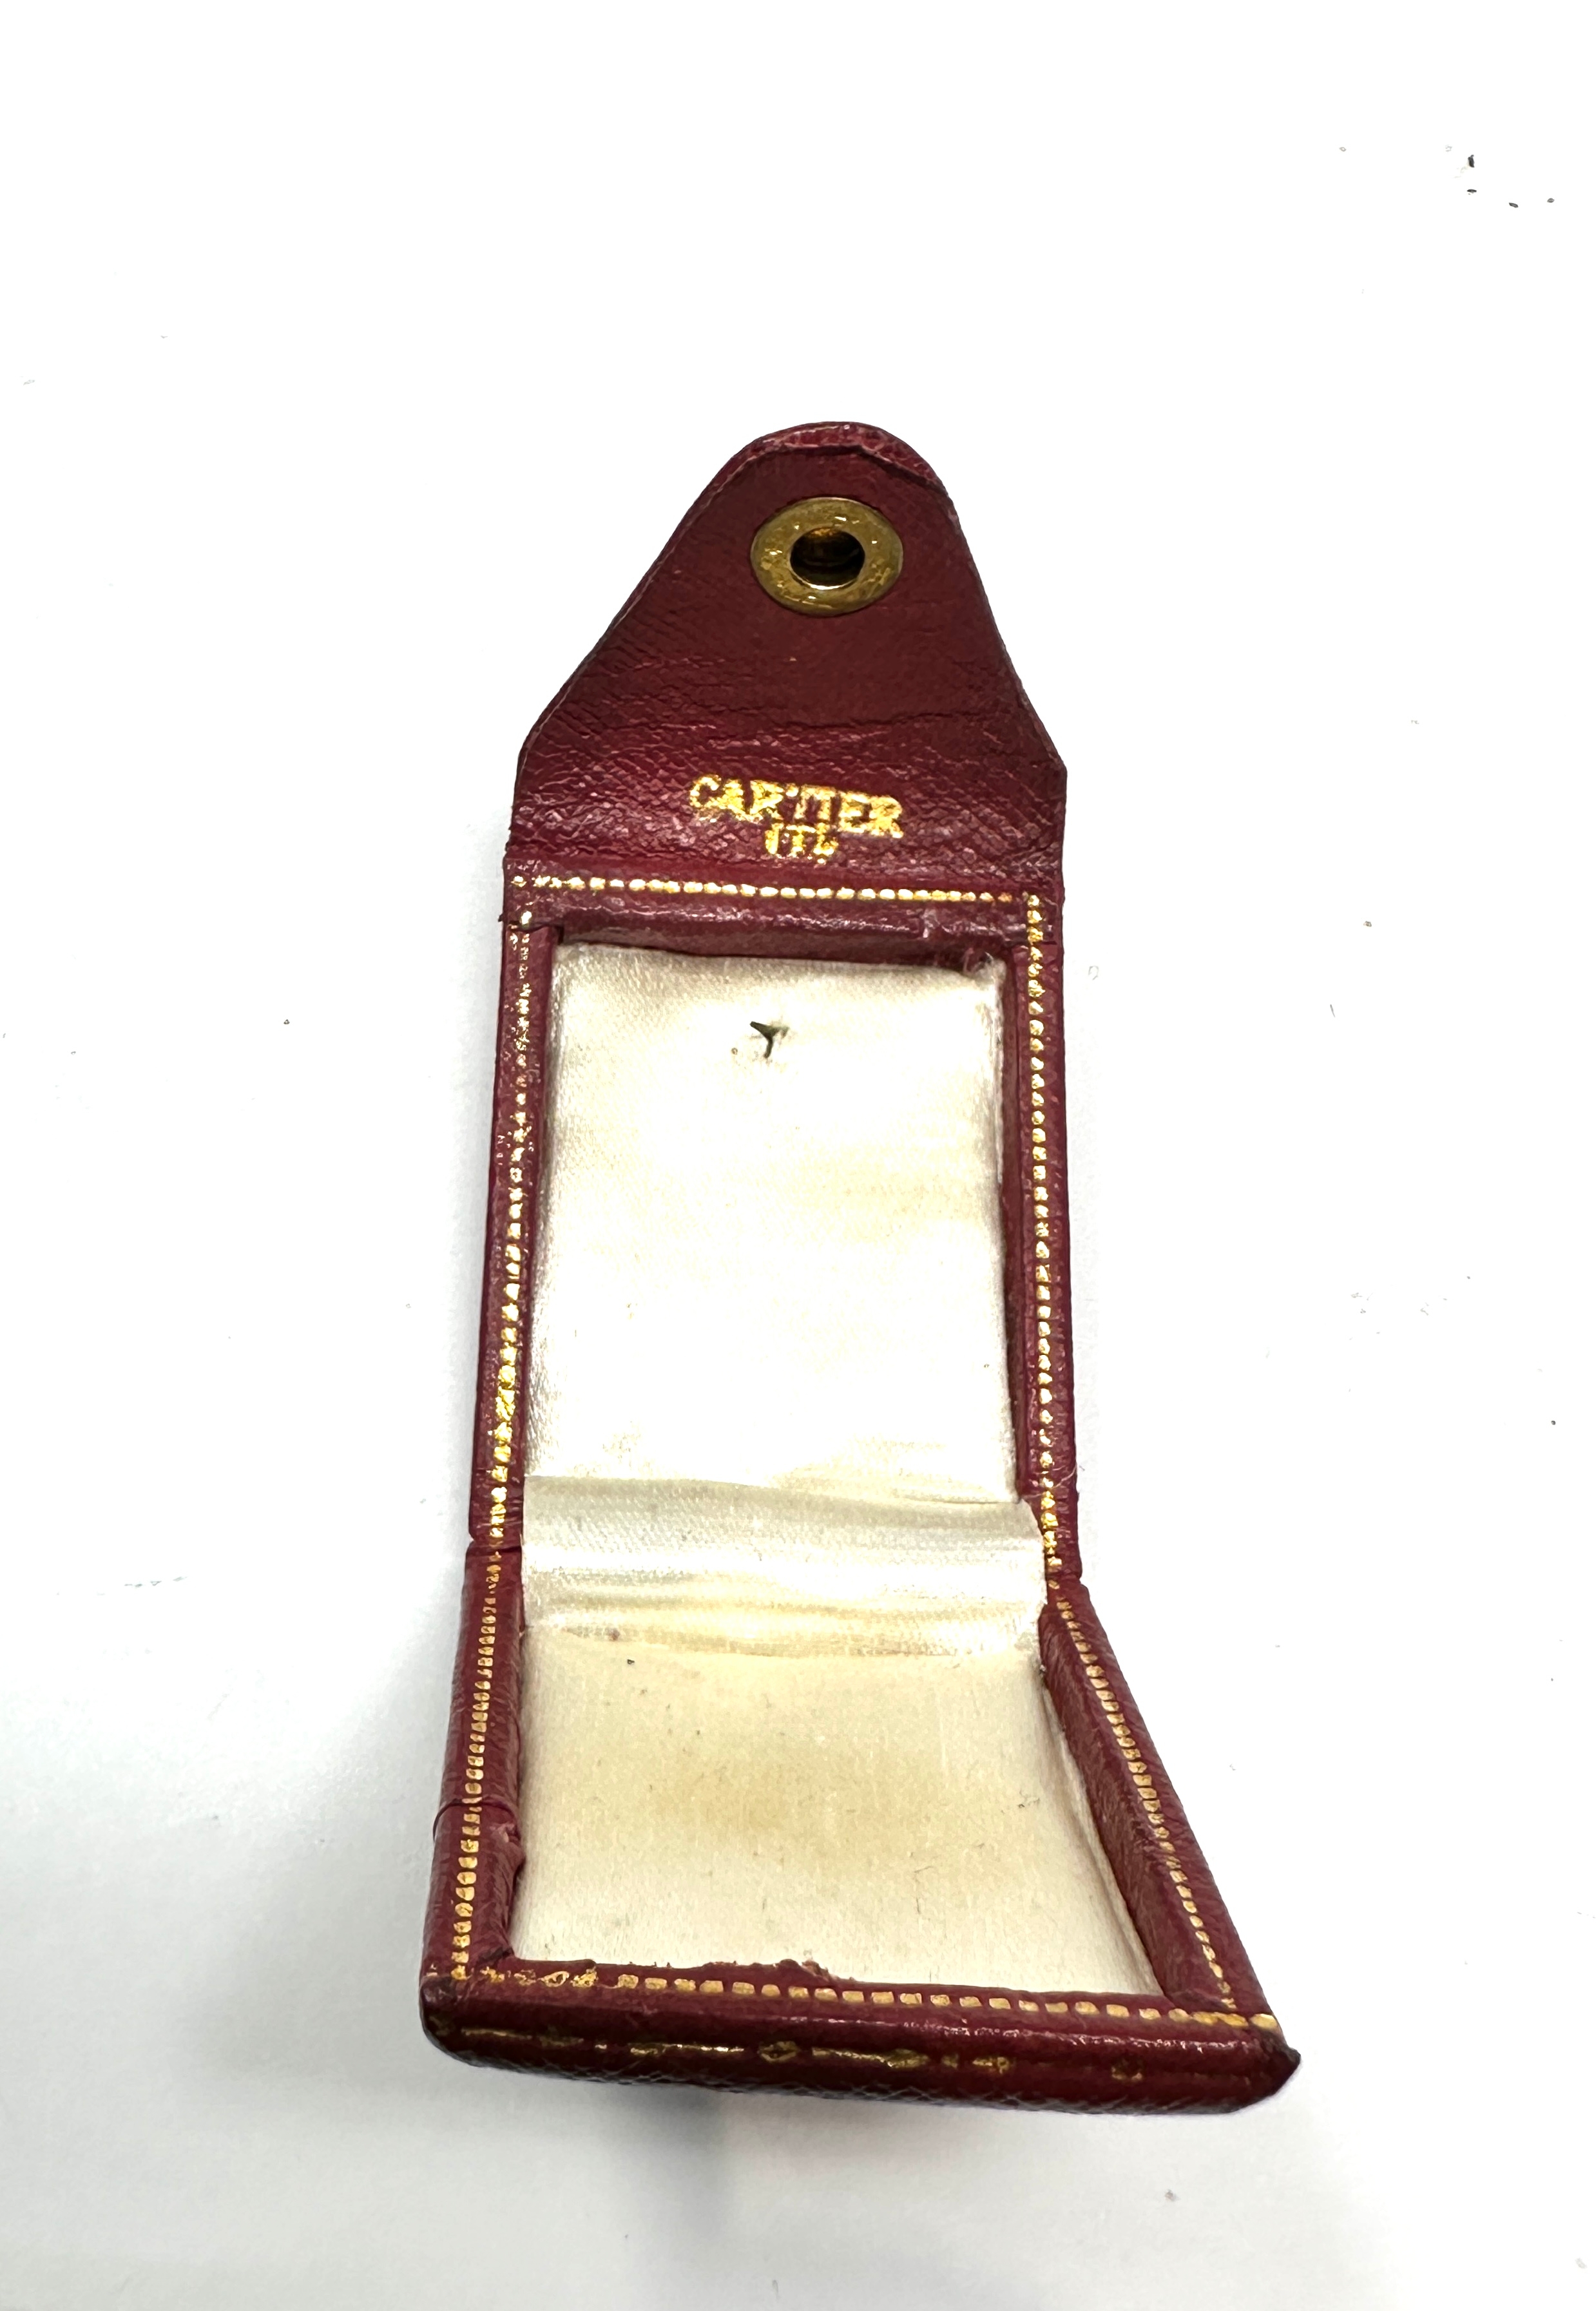 small leather cartier envelope design jewellery box measures approx 4cm by 3cm - Image 2 of 4